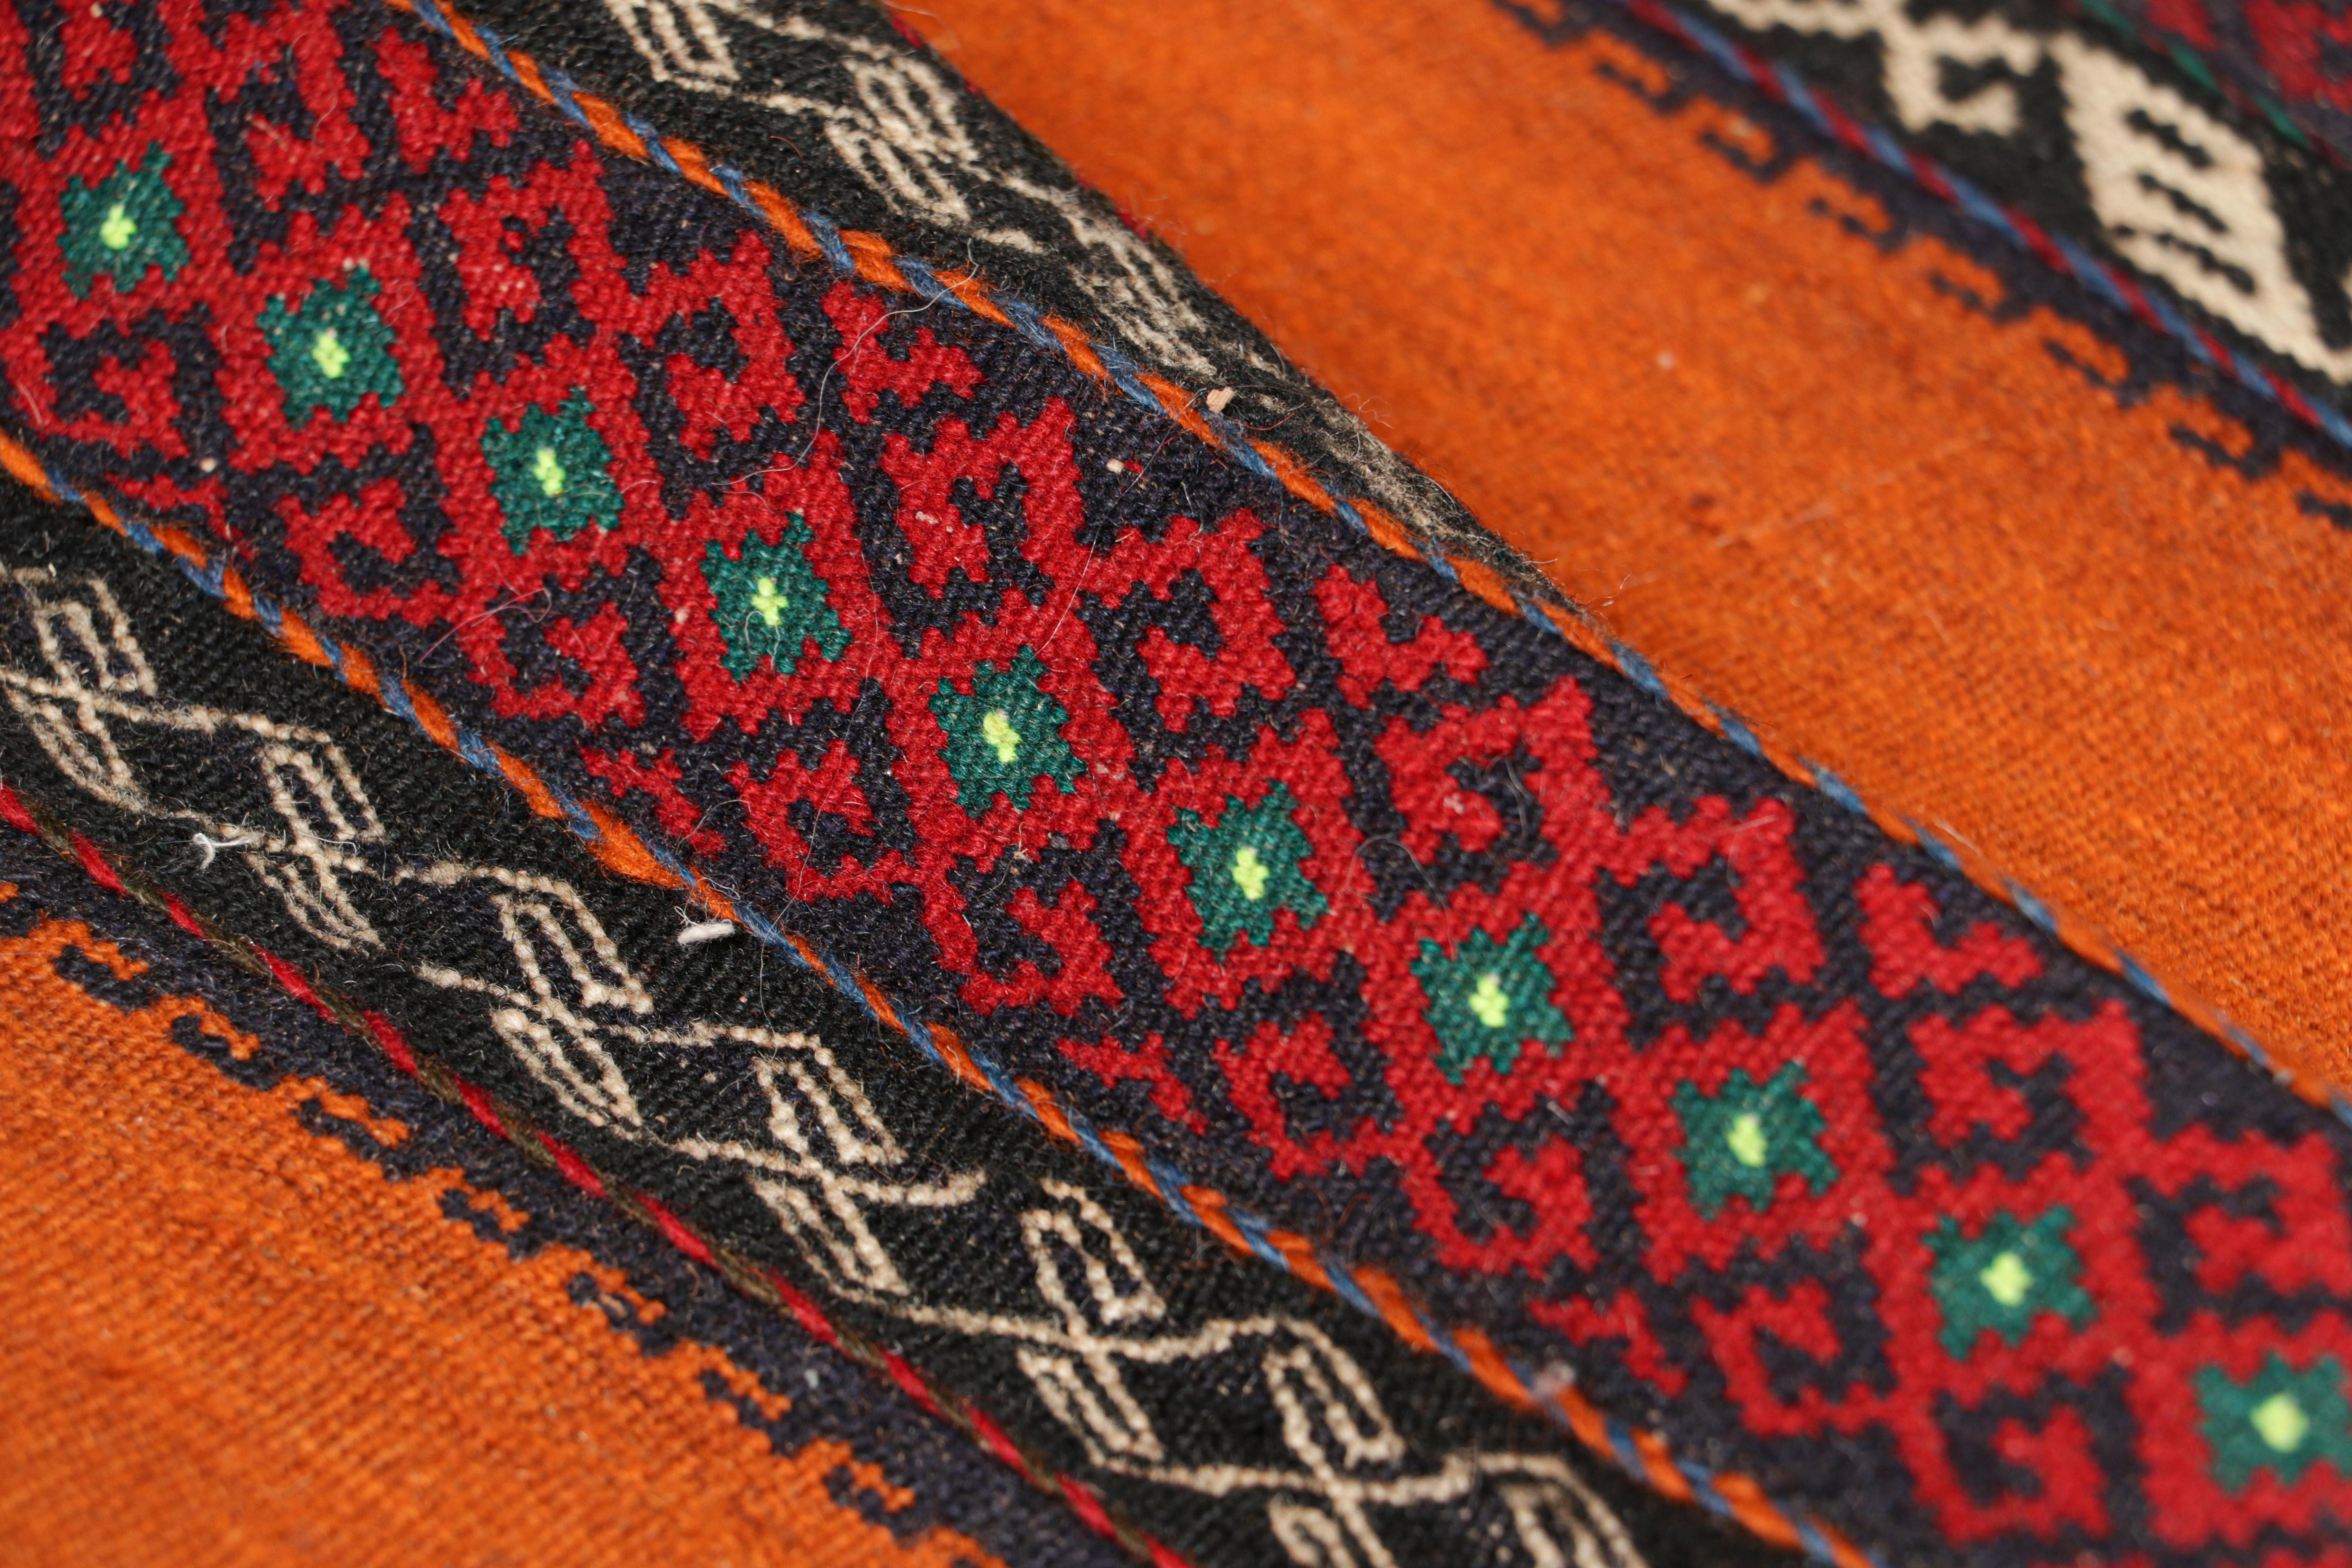 Mid-20th Century Vintage Afghan Kilim Runner in Orange with Geometric Patterns, from Rug & Kilim For Sale